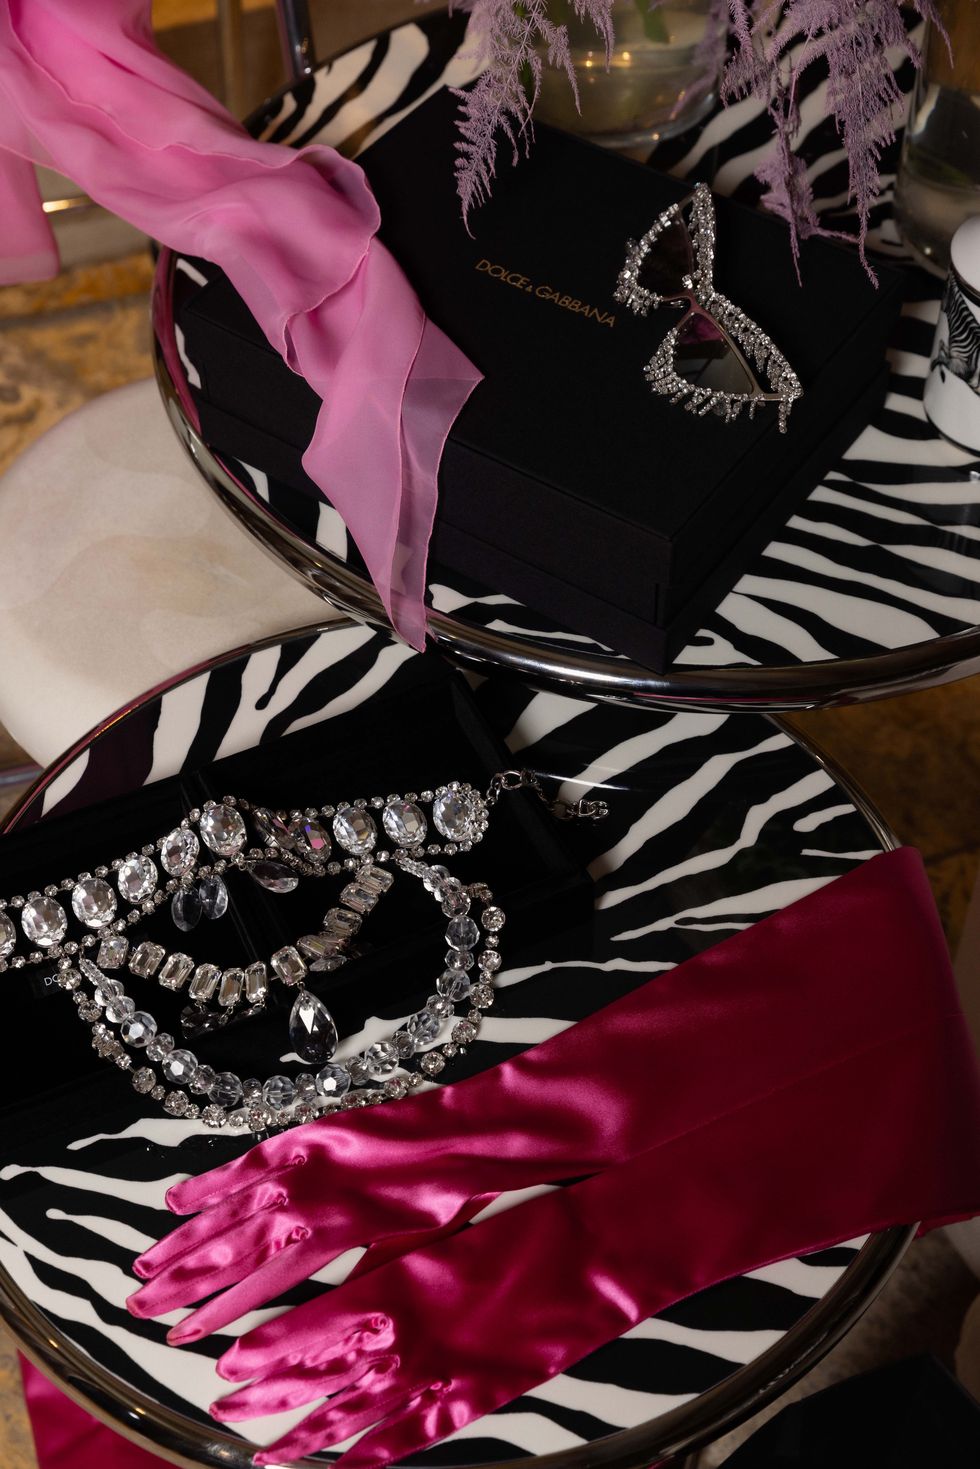 a collection of pink gloves and jewelry